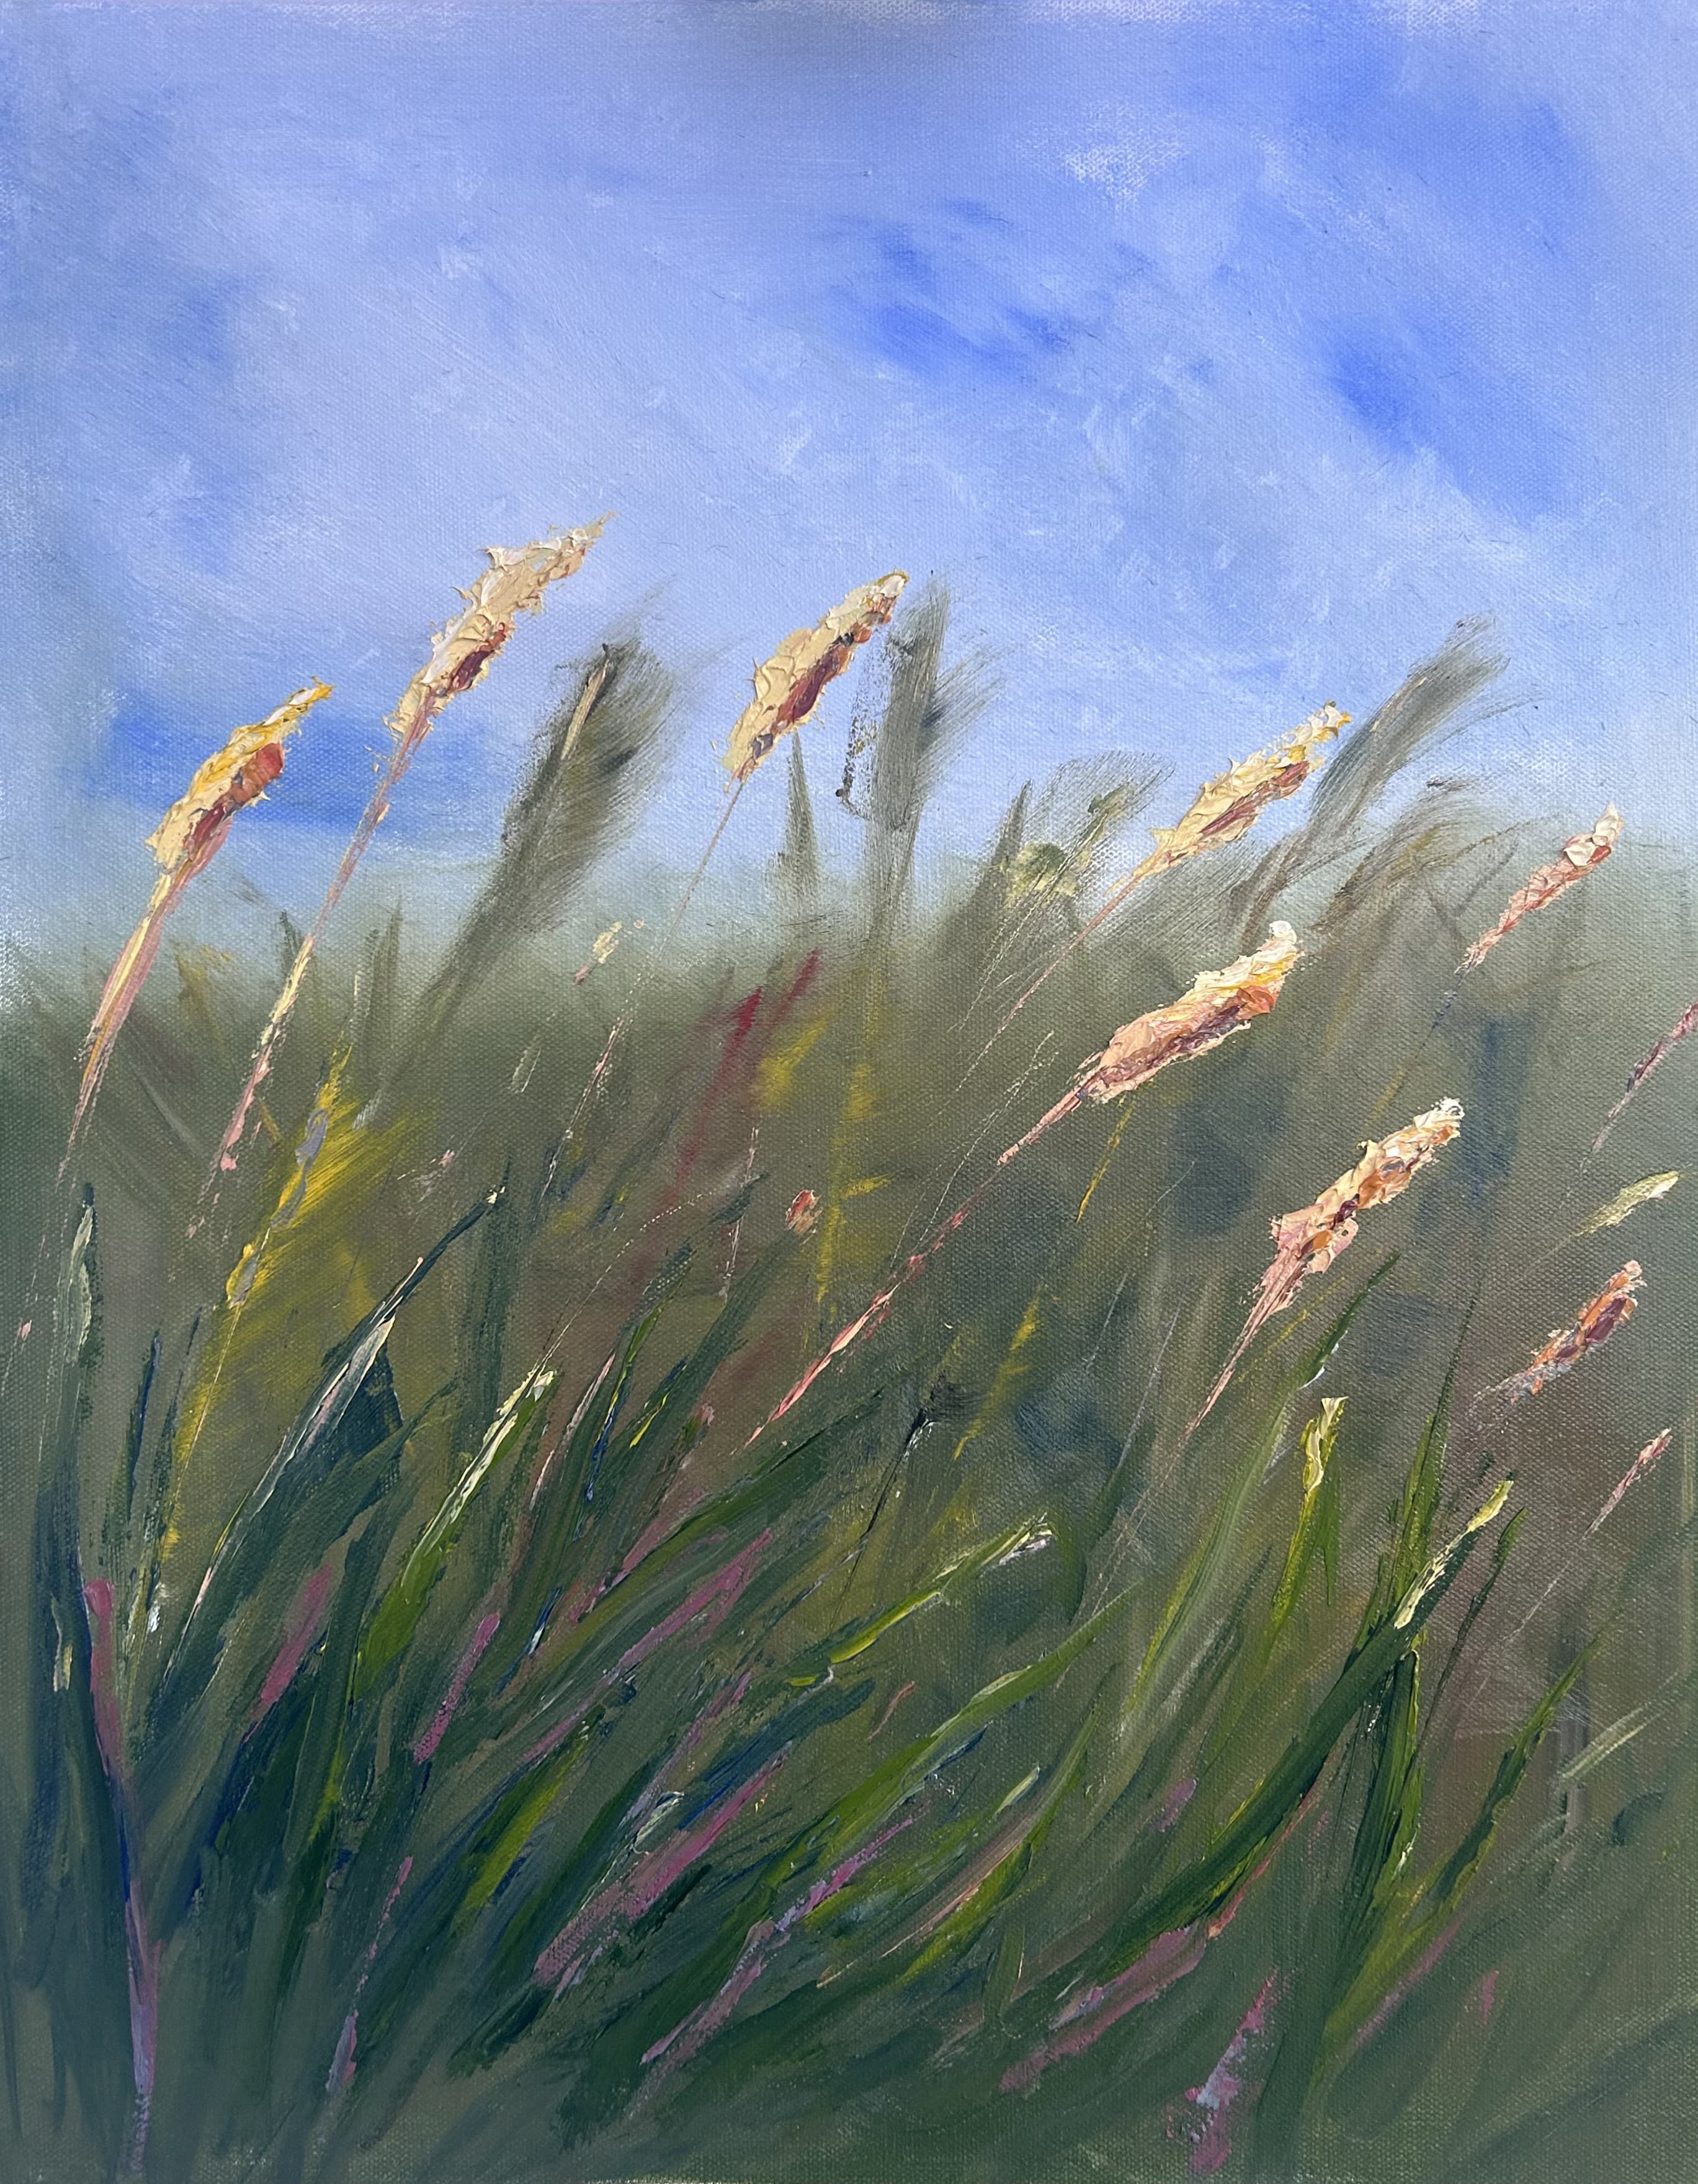 Breeze - Tranquil Impressionist Oil Painting